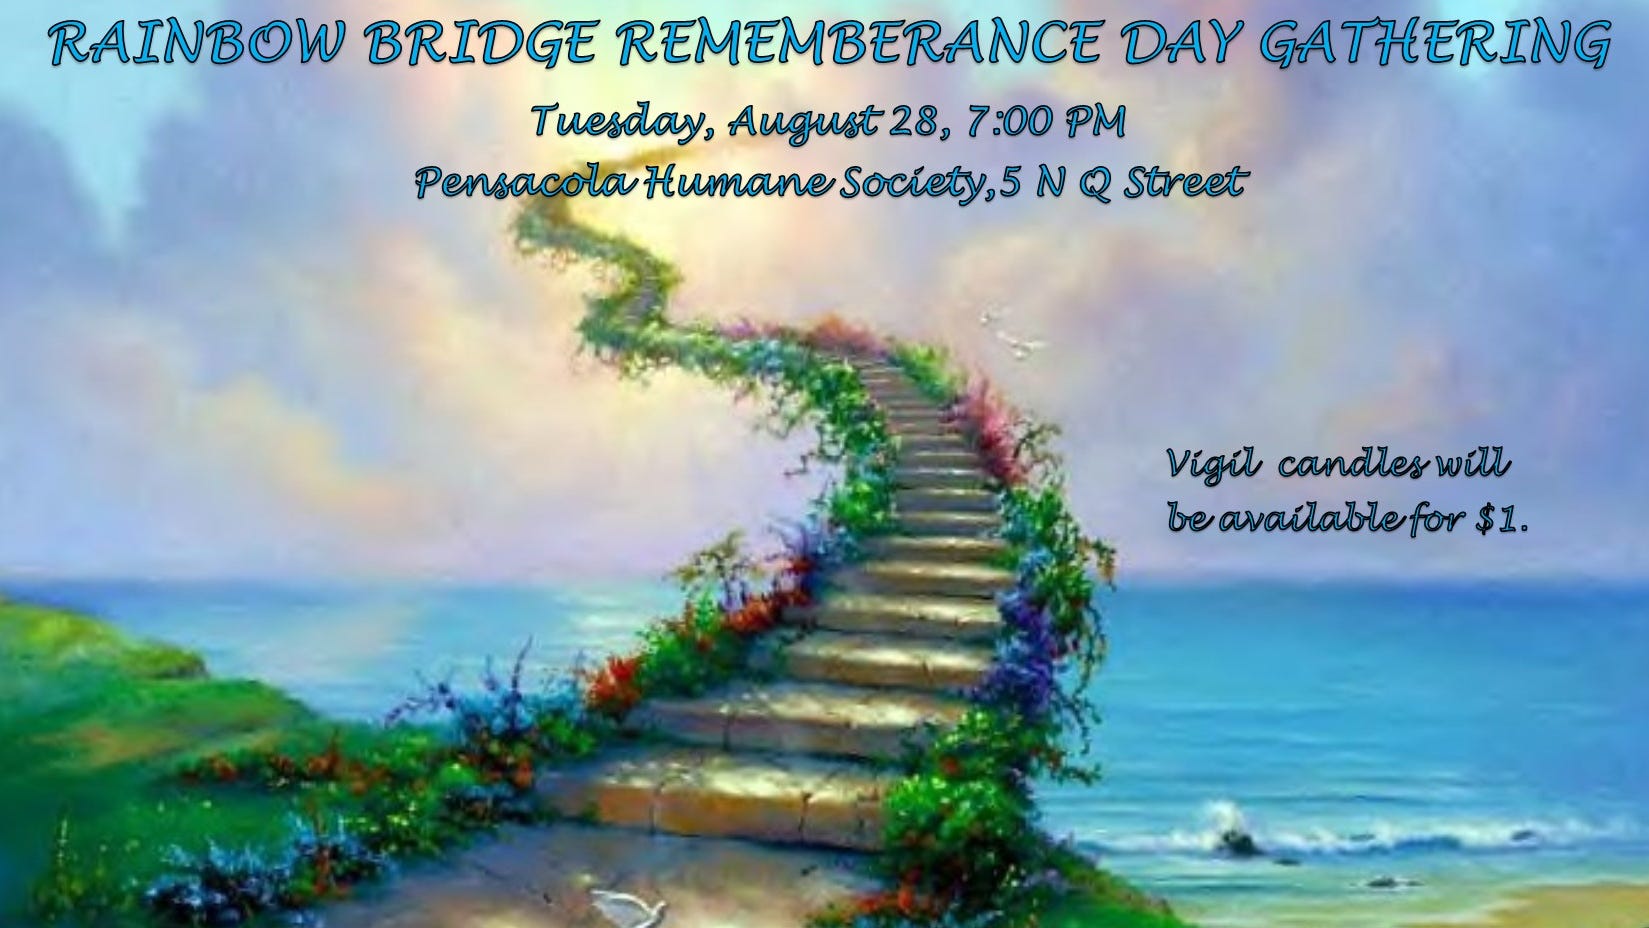 Rainbow Bridge Remembrance Day Gathering honors lost pets